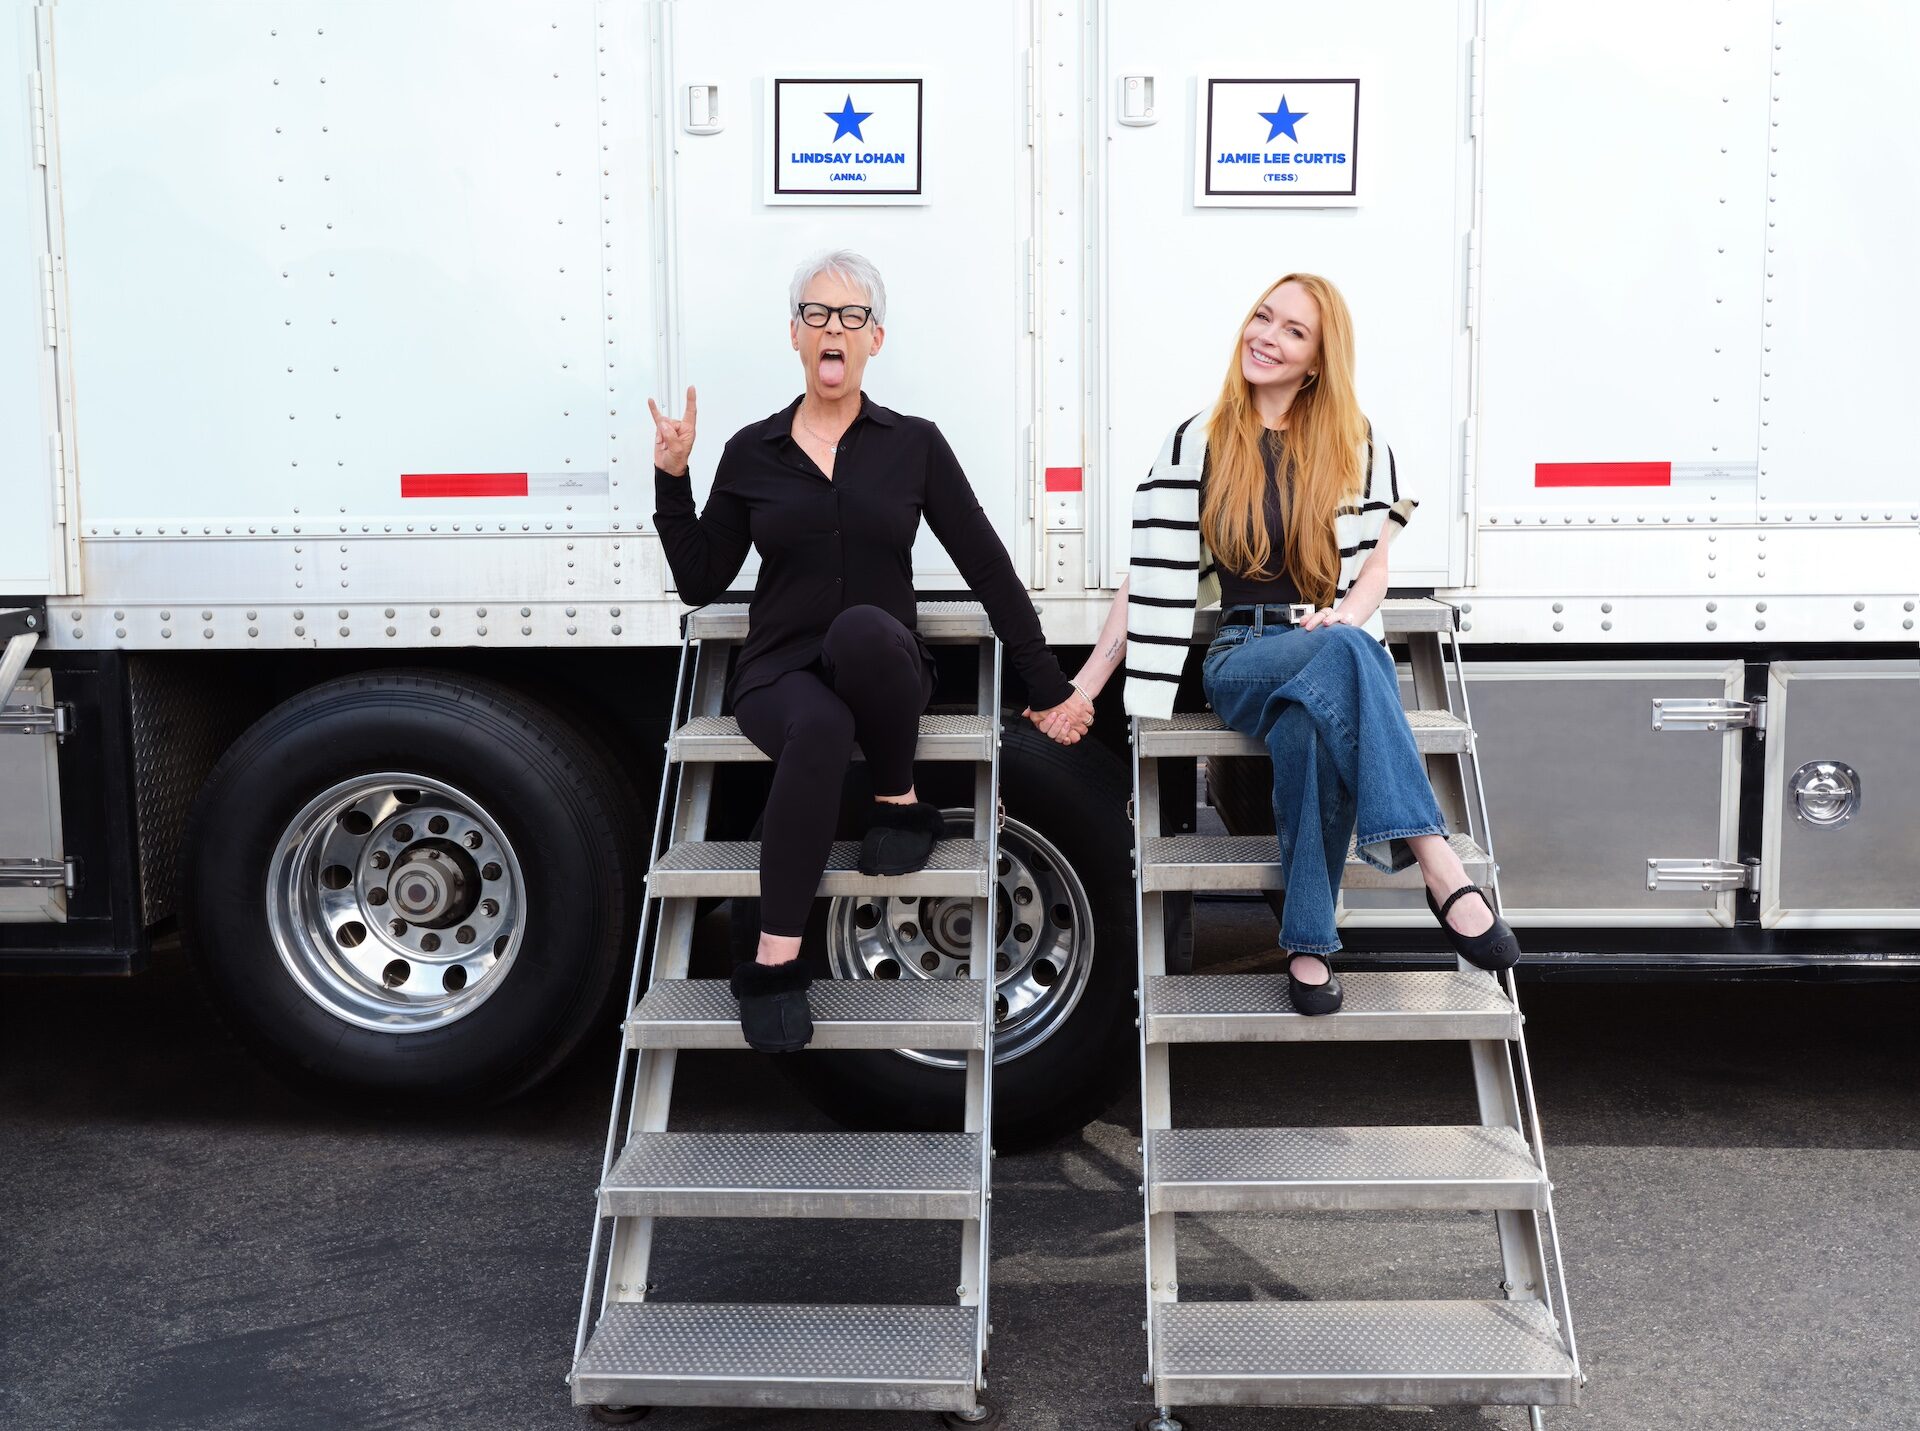 'Freaky Friday 2' has started production, with Lindsay Lohan and Jamie Lee Curtis making their return to the screens.